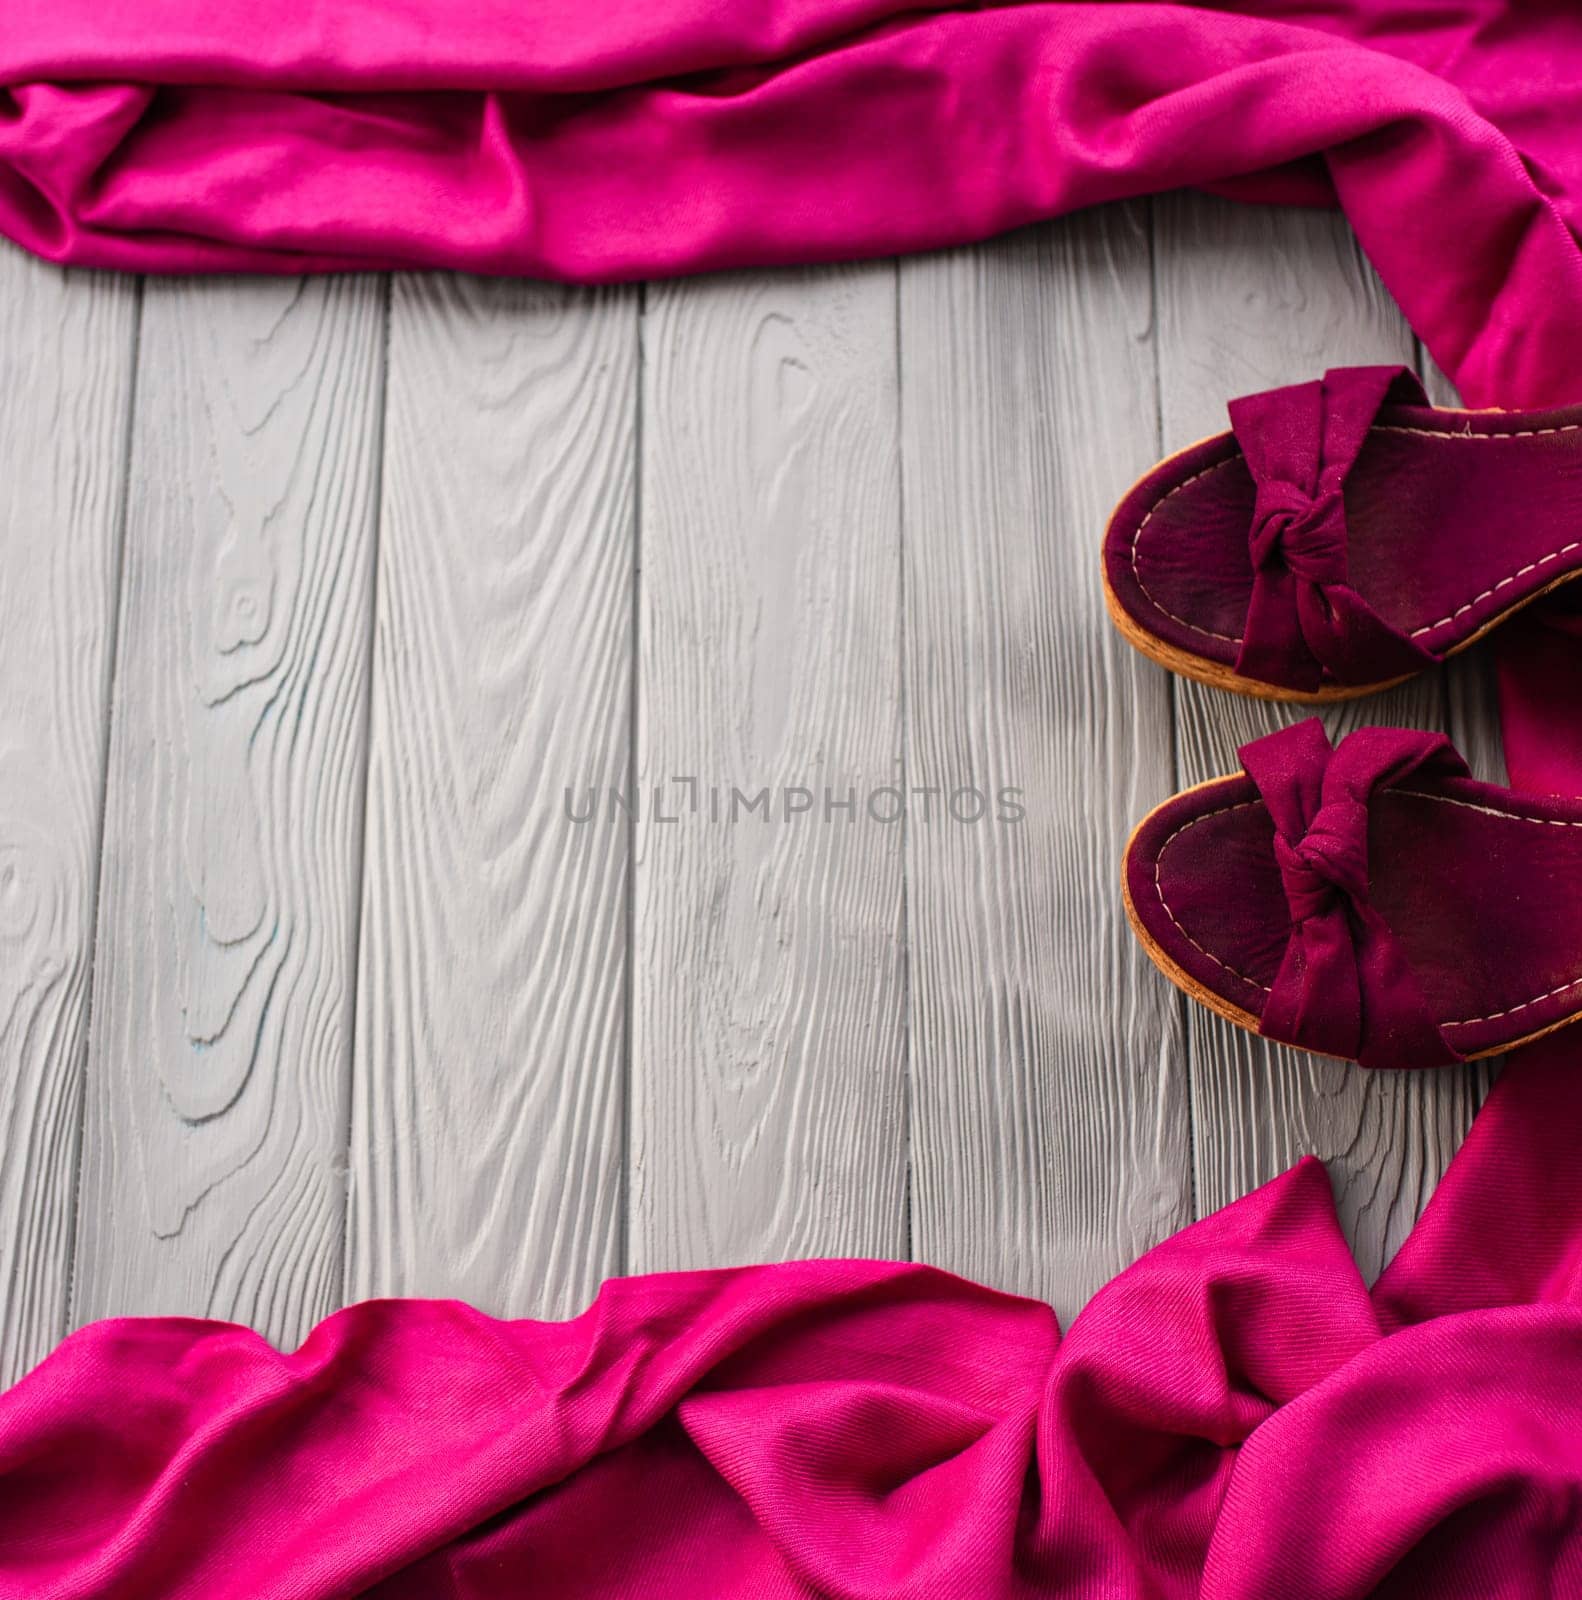 pink sandals wedge shawl shoes woman girl fashion outfit. Summer background template mockup copy free space pattern colorful composition sample text. Top view above grey wooden background flat lay